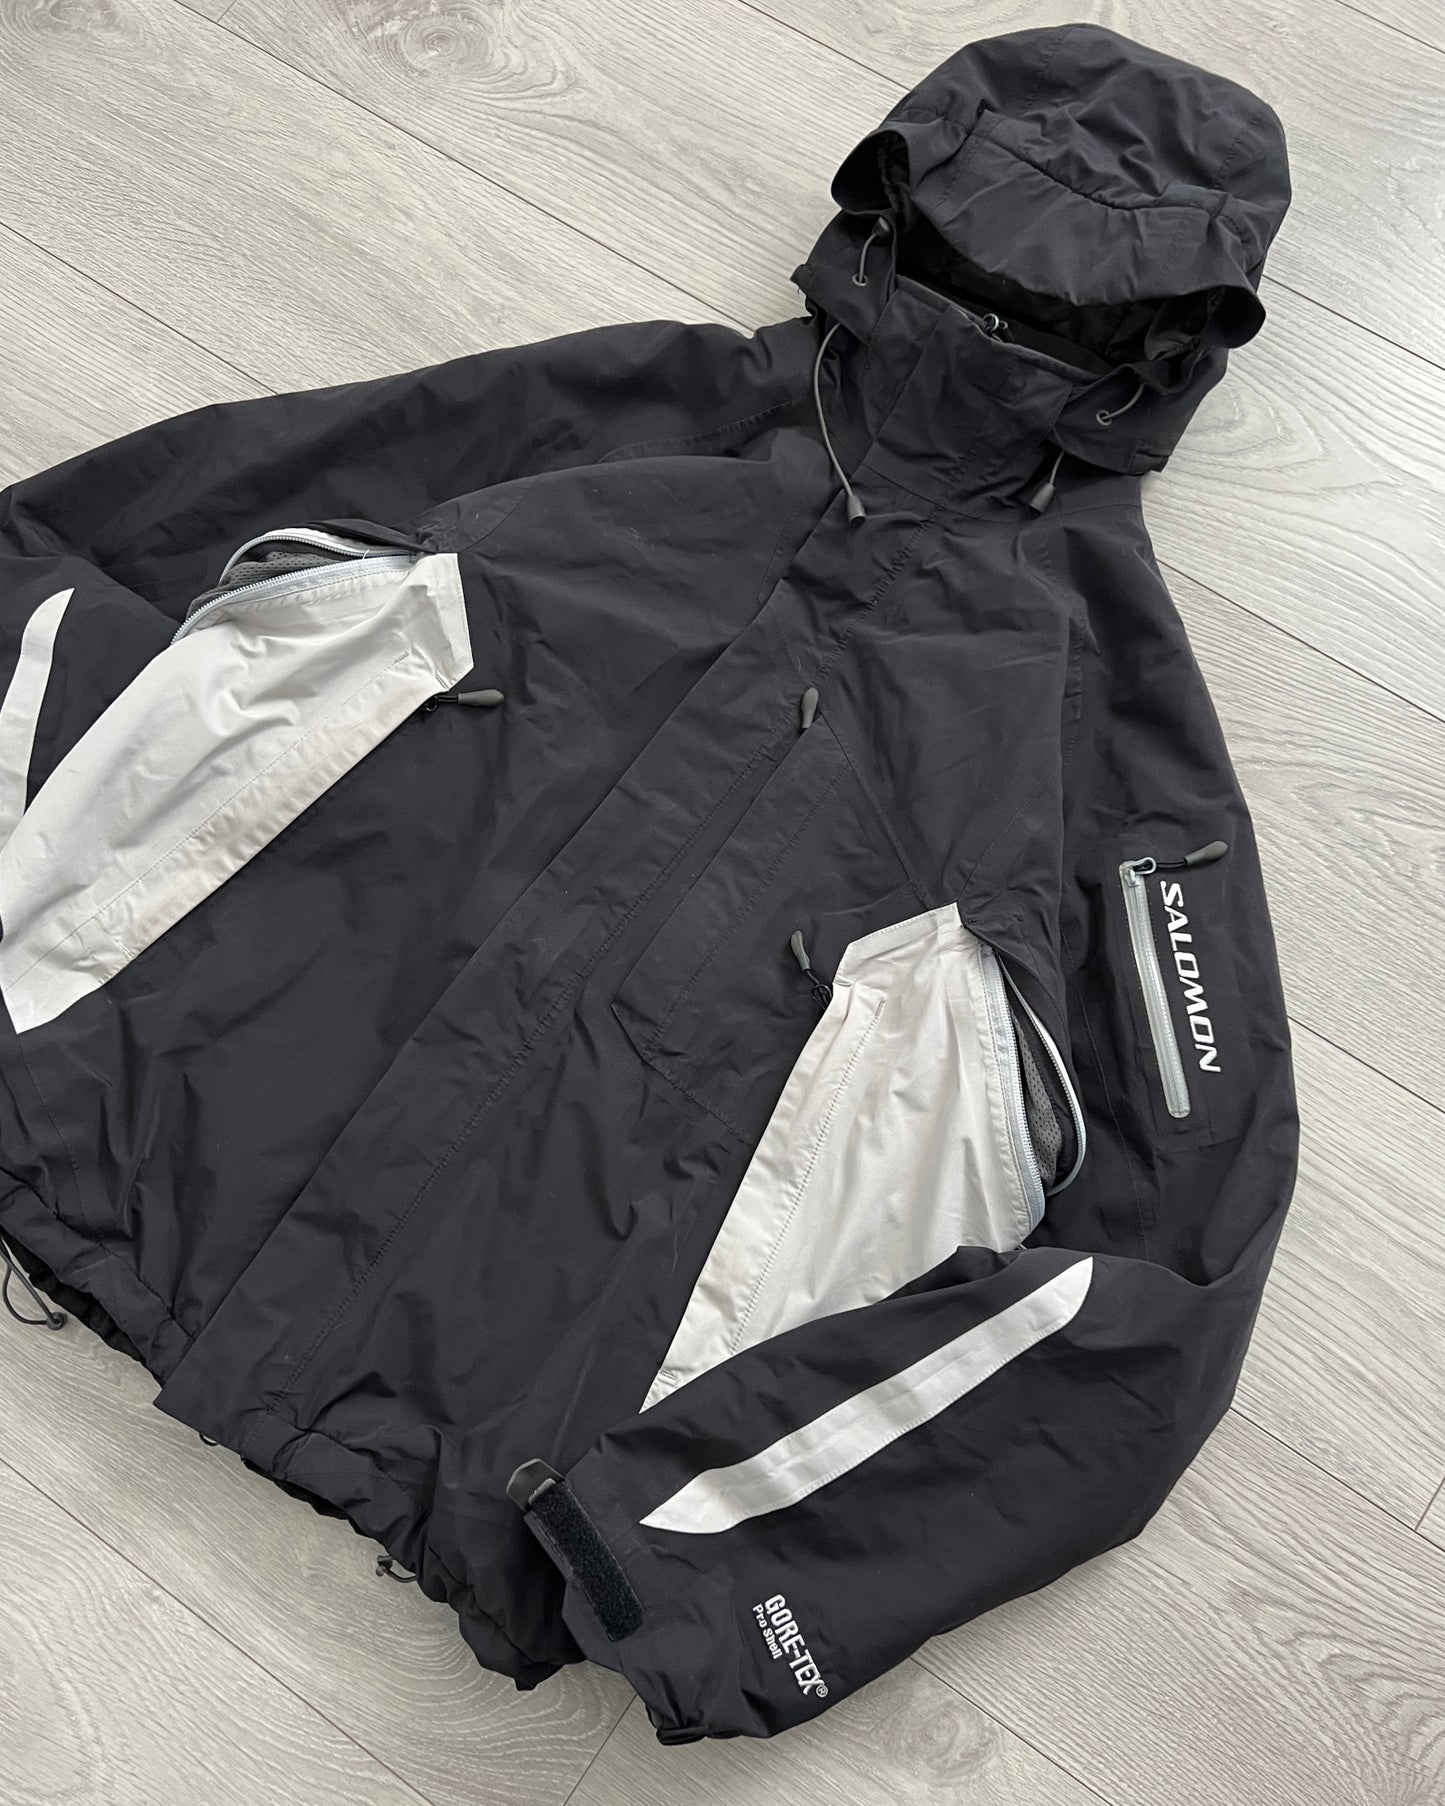 Salomon 00s Gore-Tex Pro Technical Panelled Insulated Jacket - Size L